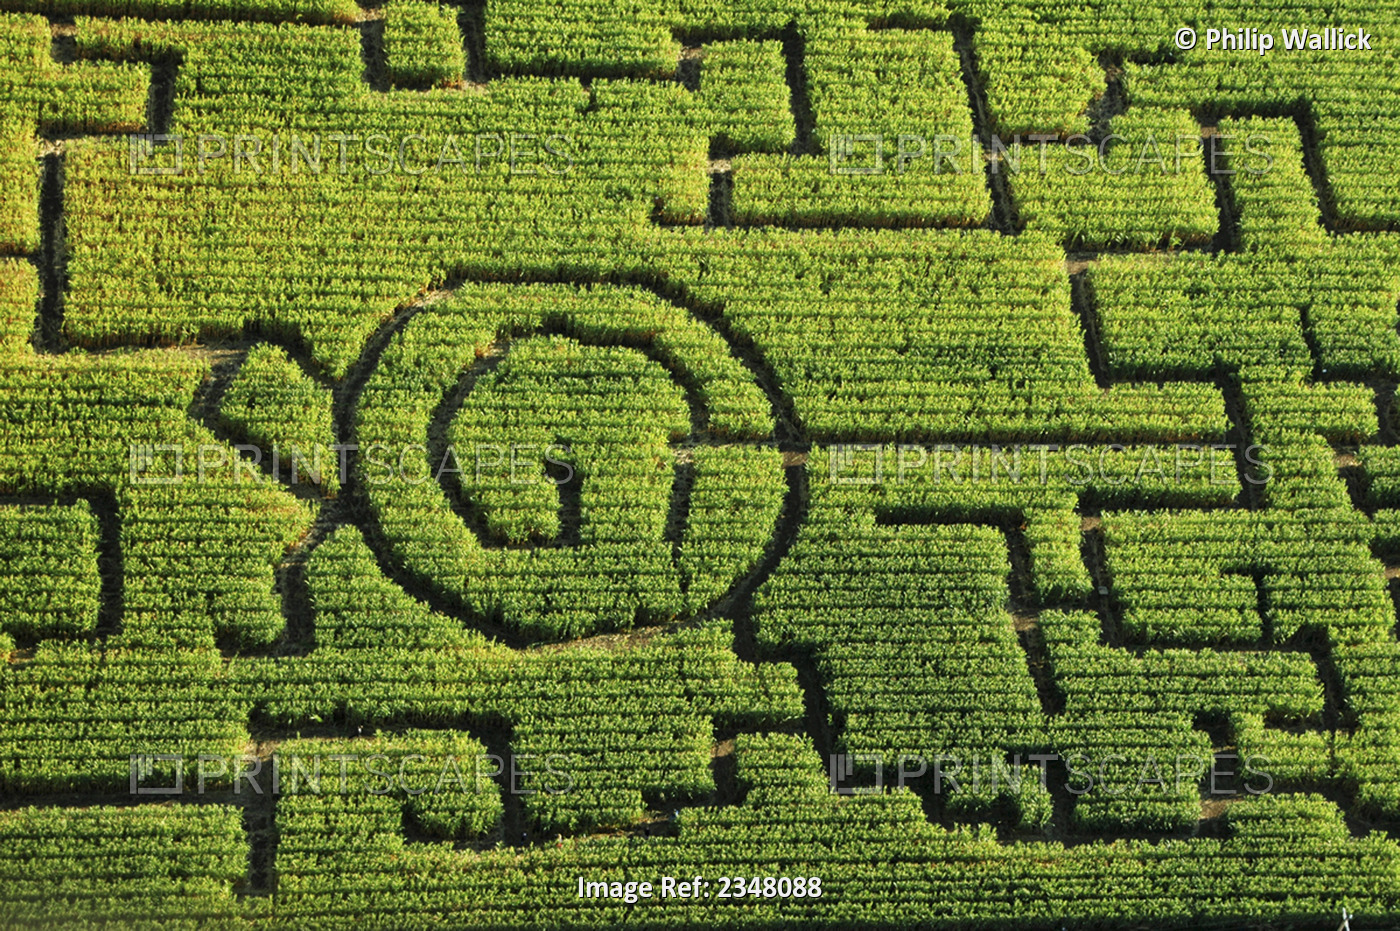 Agriculture - Aerial view of a corn maze / Chico, California, USA.